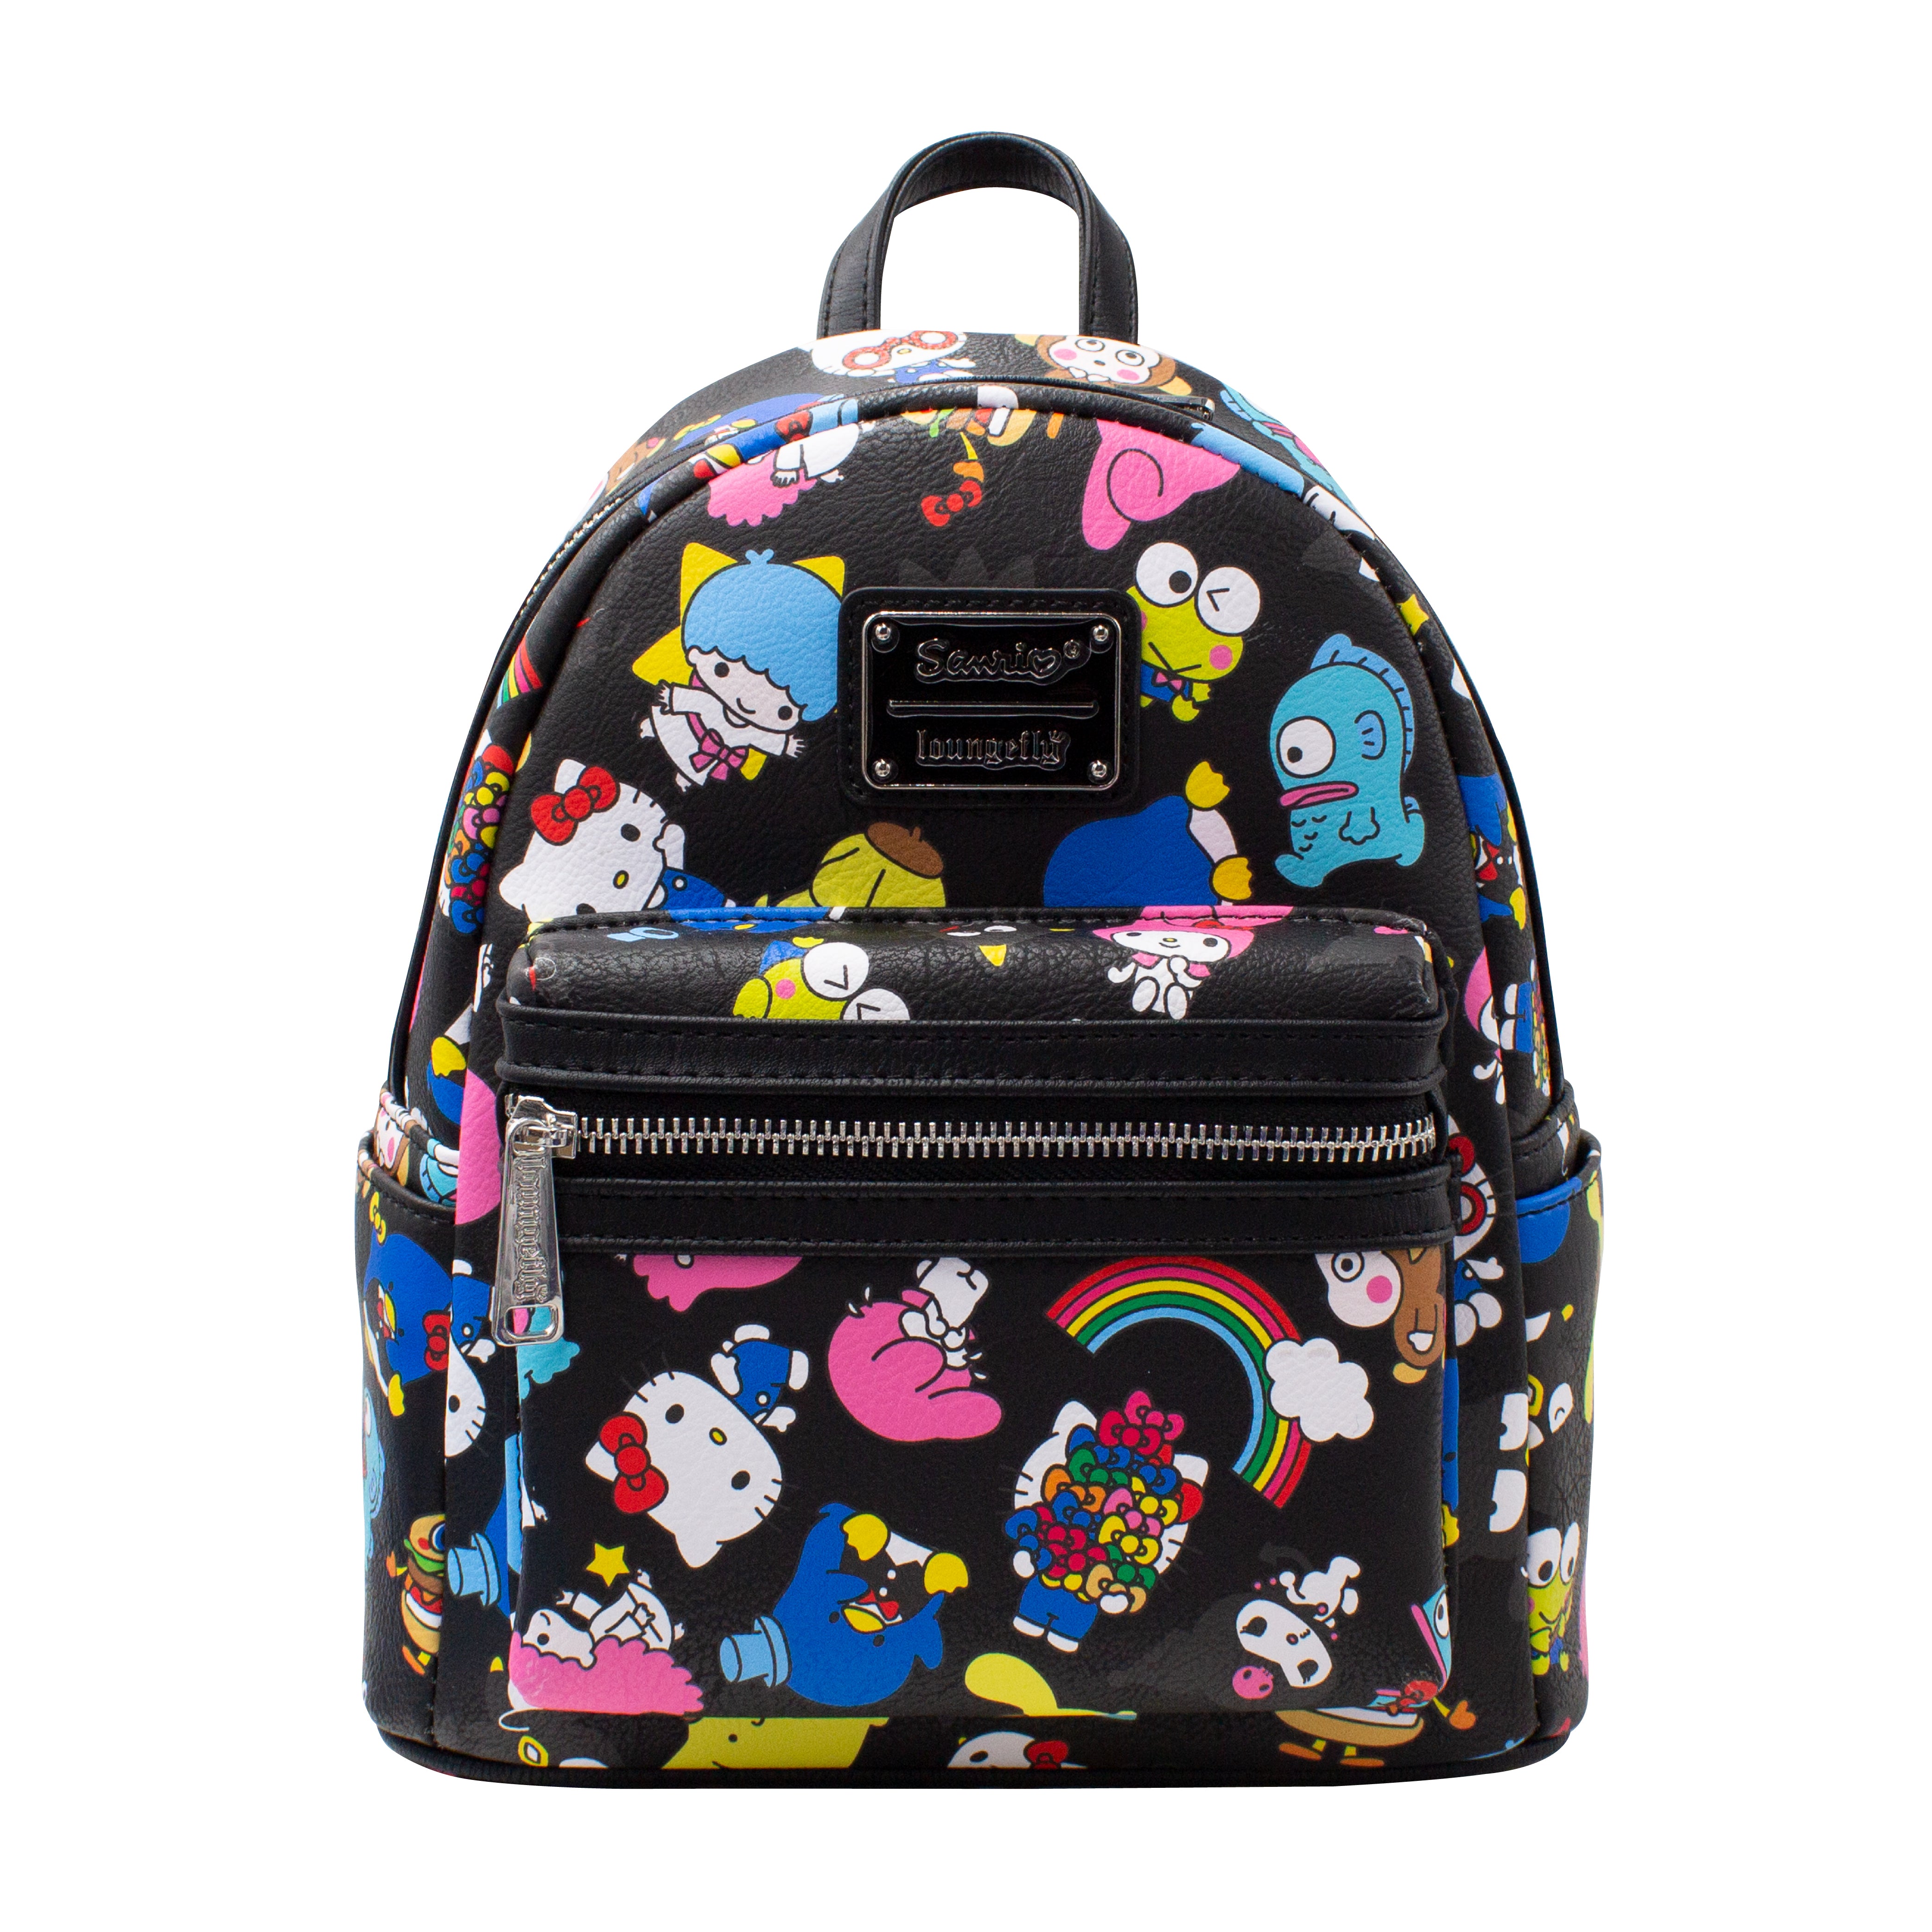 Loungefly Sanrio Hello Kitty Sweets All-Over-Print Mini Backpack